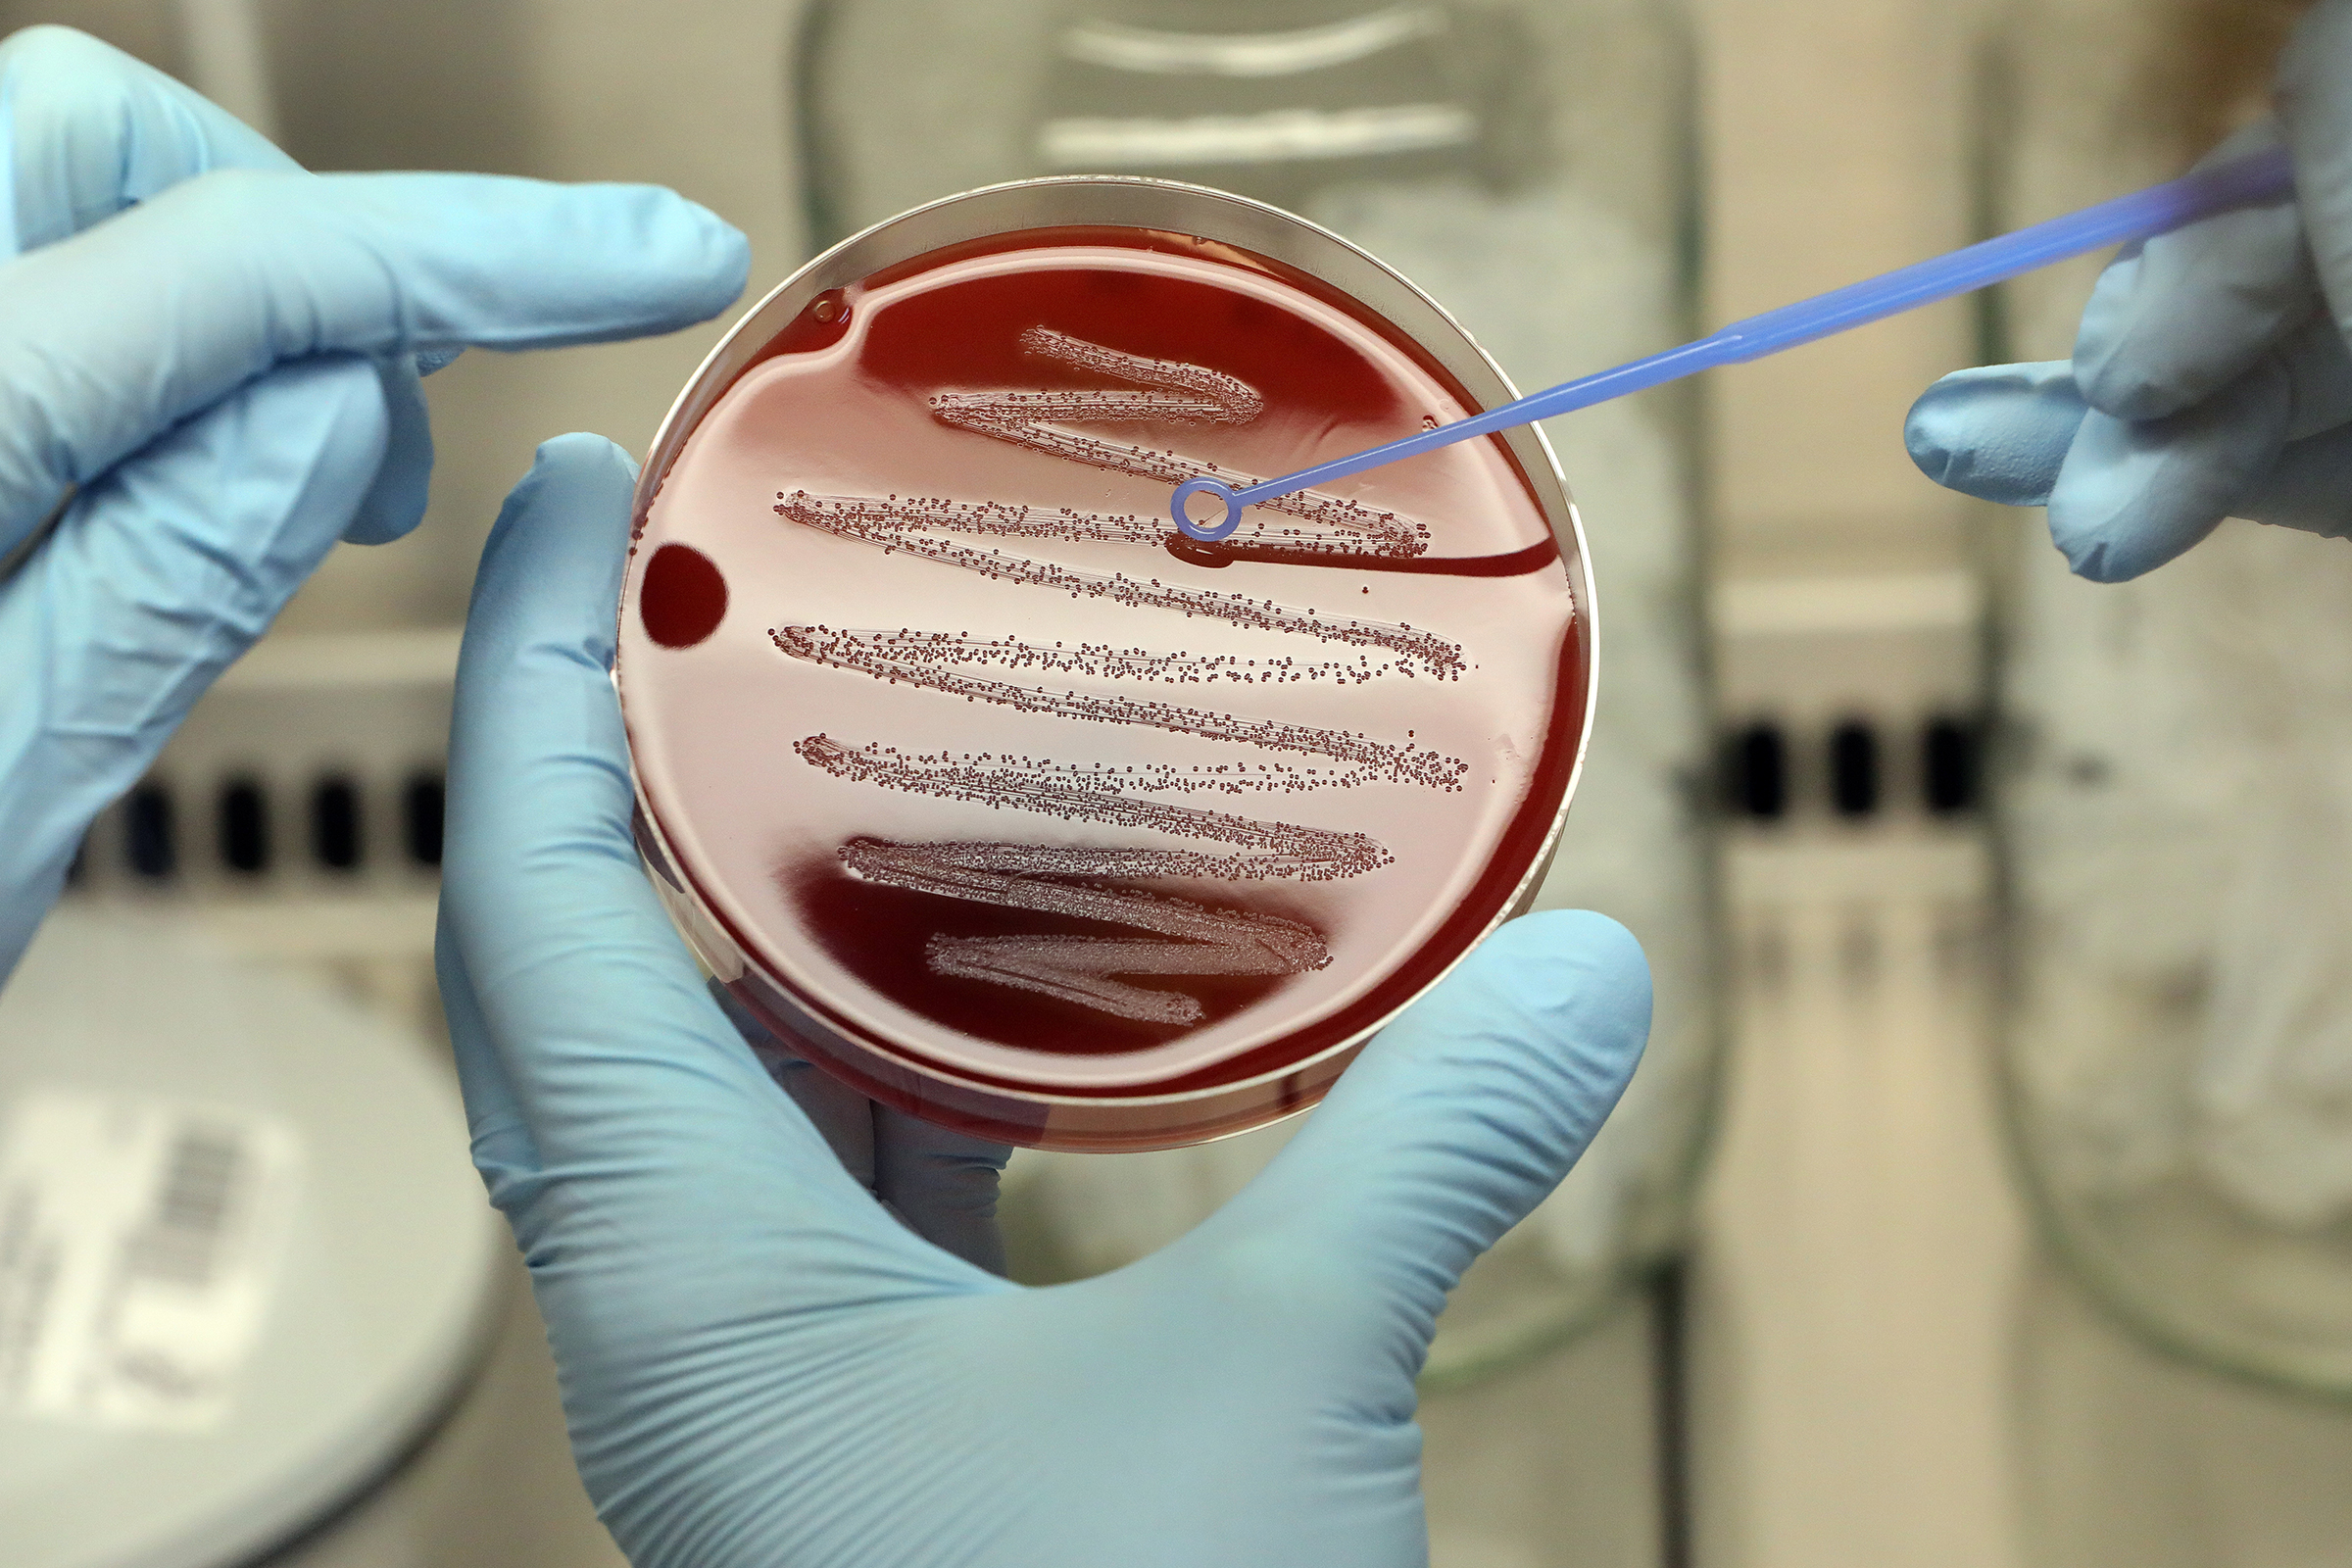 A microbiologist at the Max-Planck-Institute for Infection Biology prepares a bacterial colony of the strain Streptococcus pyogenes on a blood agar plate. Current research focuses on finding regulatory mechanisms for infection and immunity in bacteria. Scientists are especially interested in the role of RNA and certain proteins that control cellular processes. The goal is to incorporate these findings into new medical advancements, as is the case with CRISPR-Cas9. (Wolfgang Kumm—dpa/Getty Images)